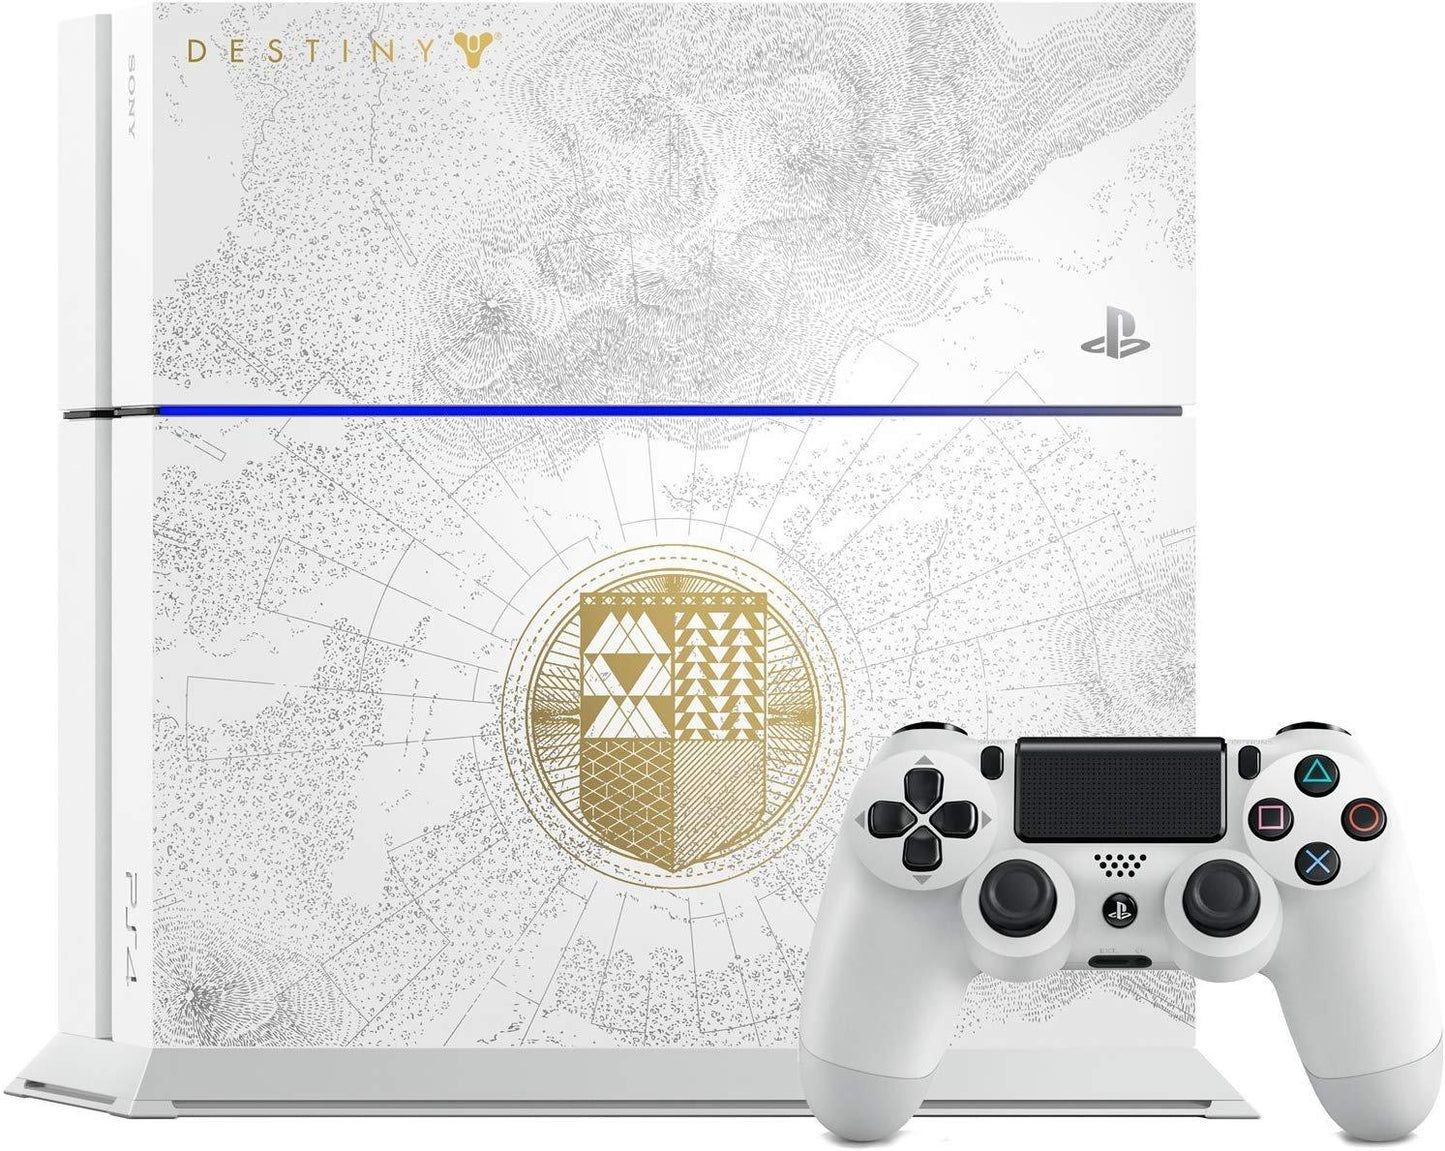 Playstation 4 500 GB Console Destiny: The Taken King Edition (Playstation 4)